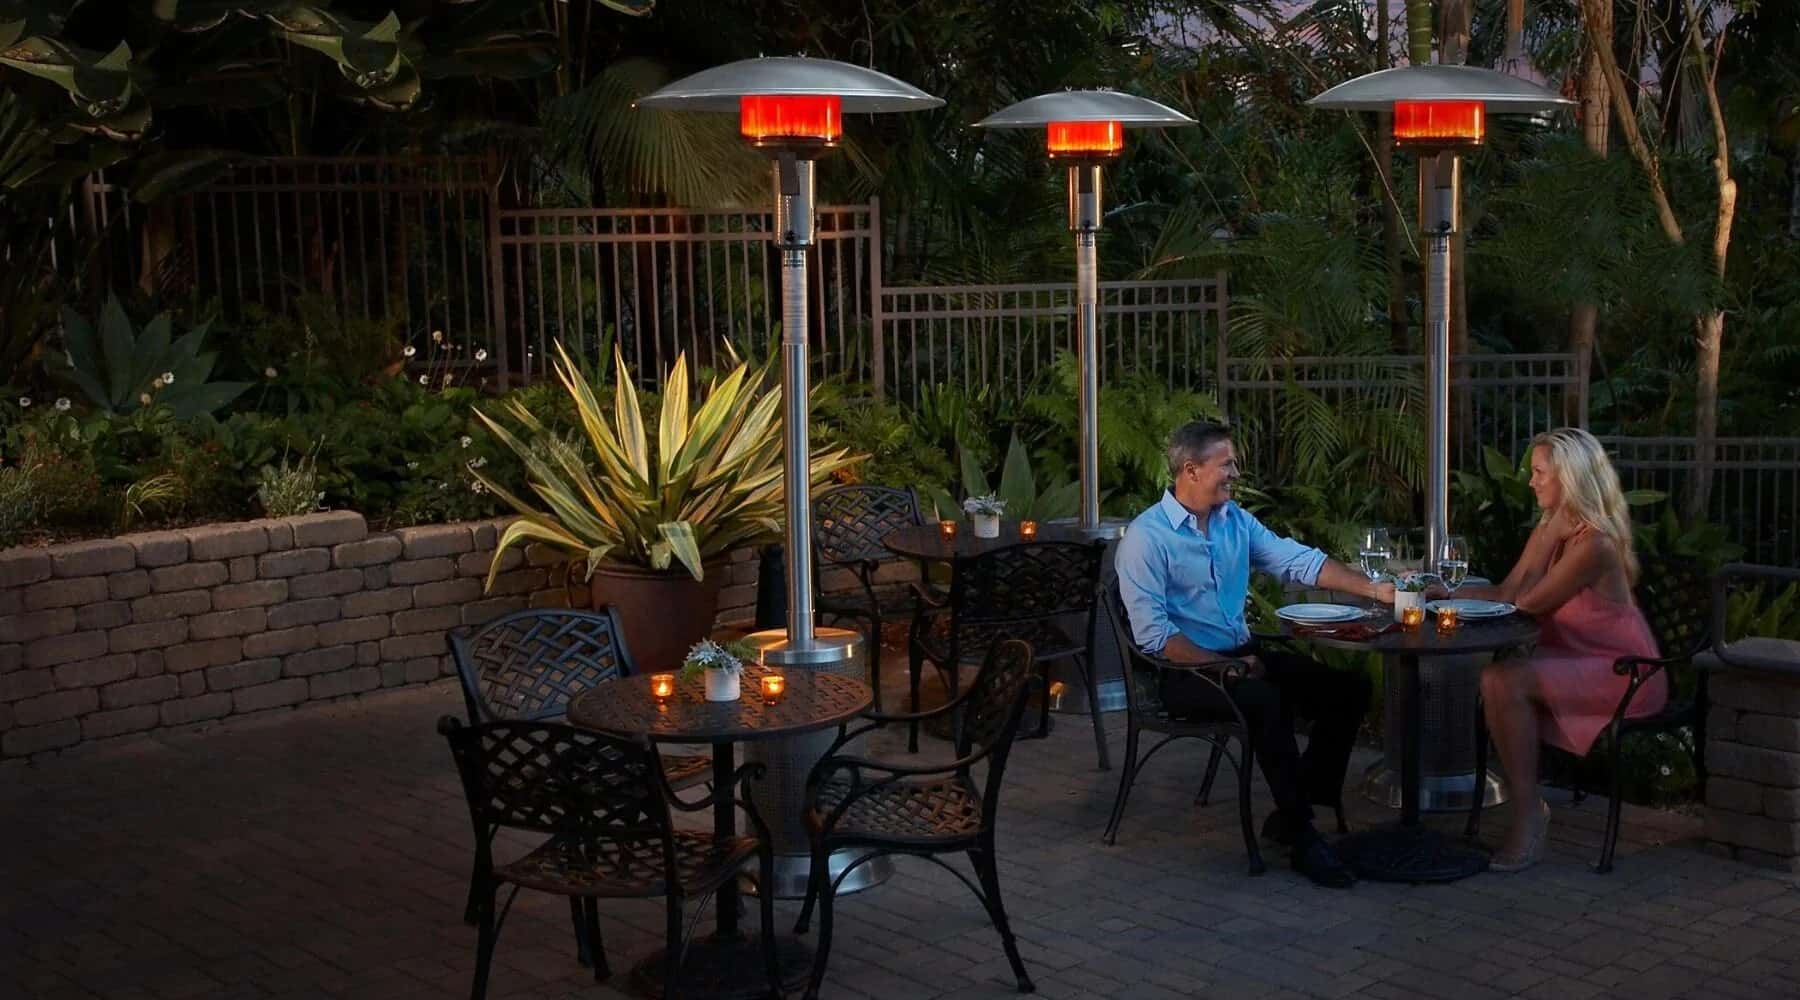 How to Choose the Best Gas Patio Heater?